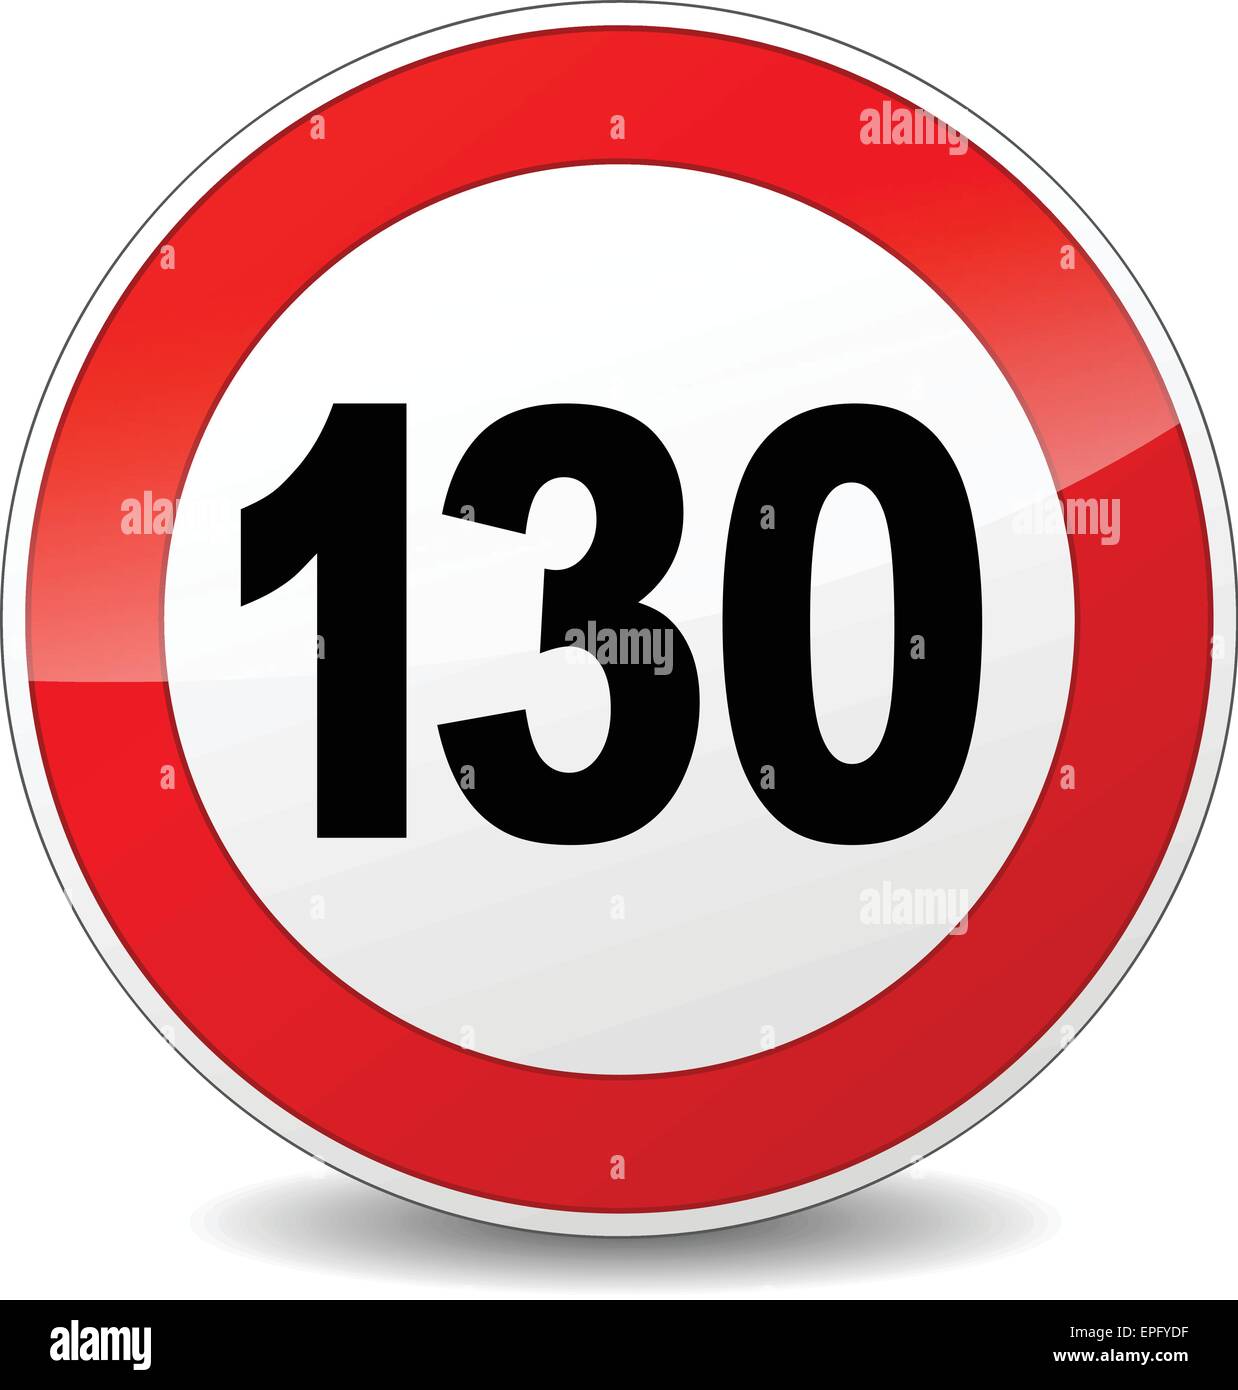 illustration of red and black speed limit sign Stock Vector